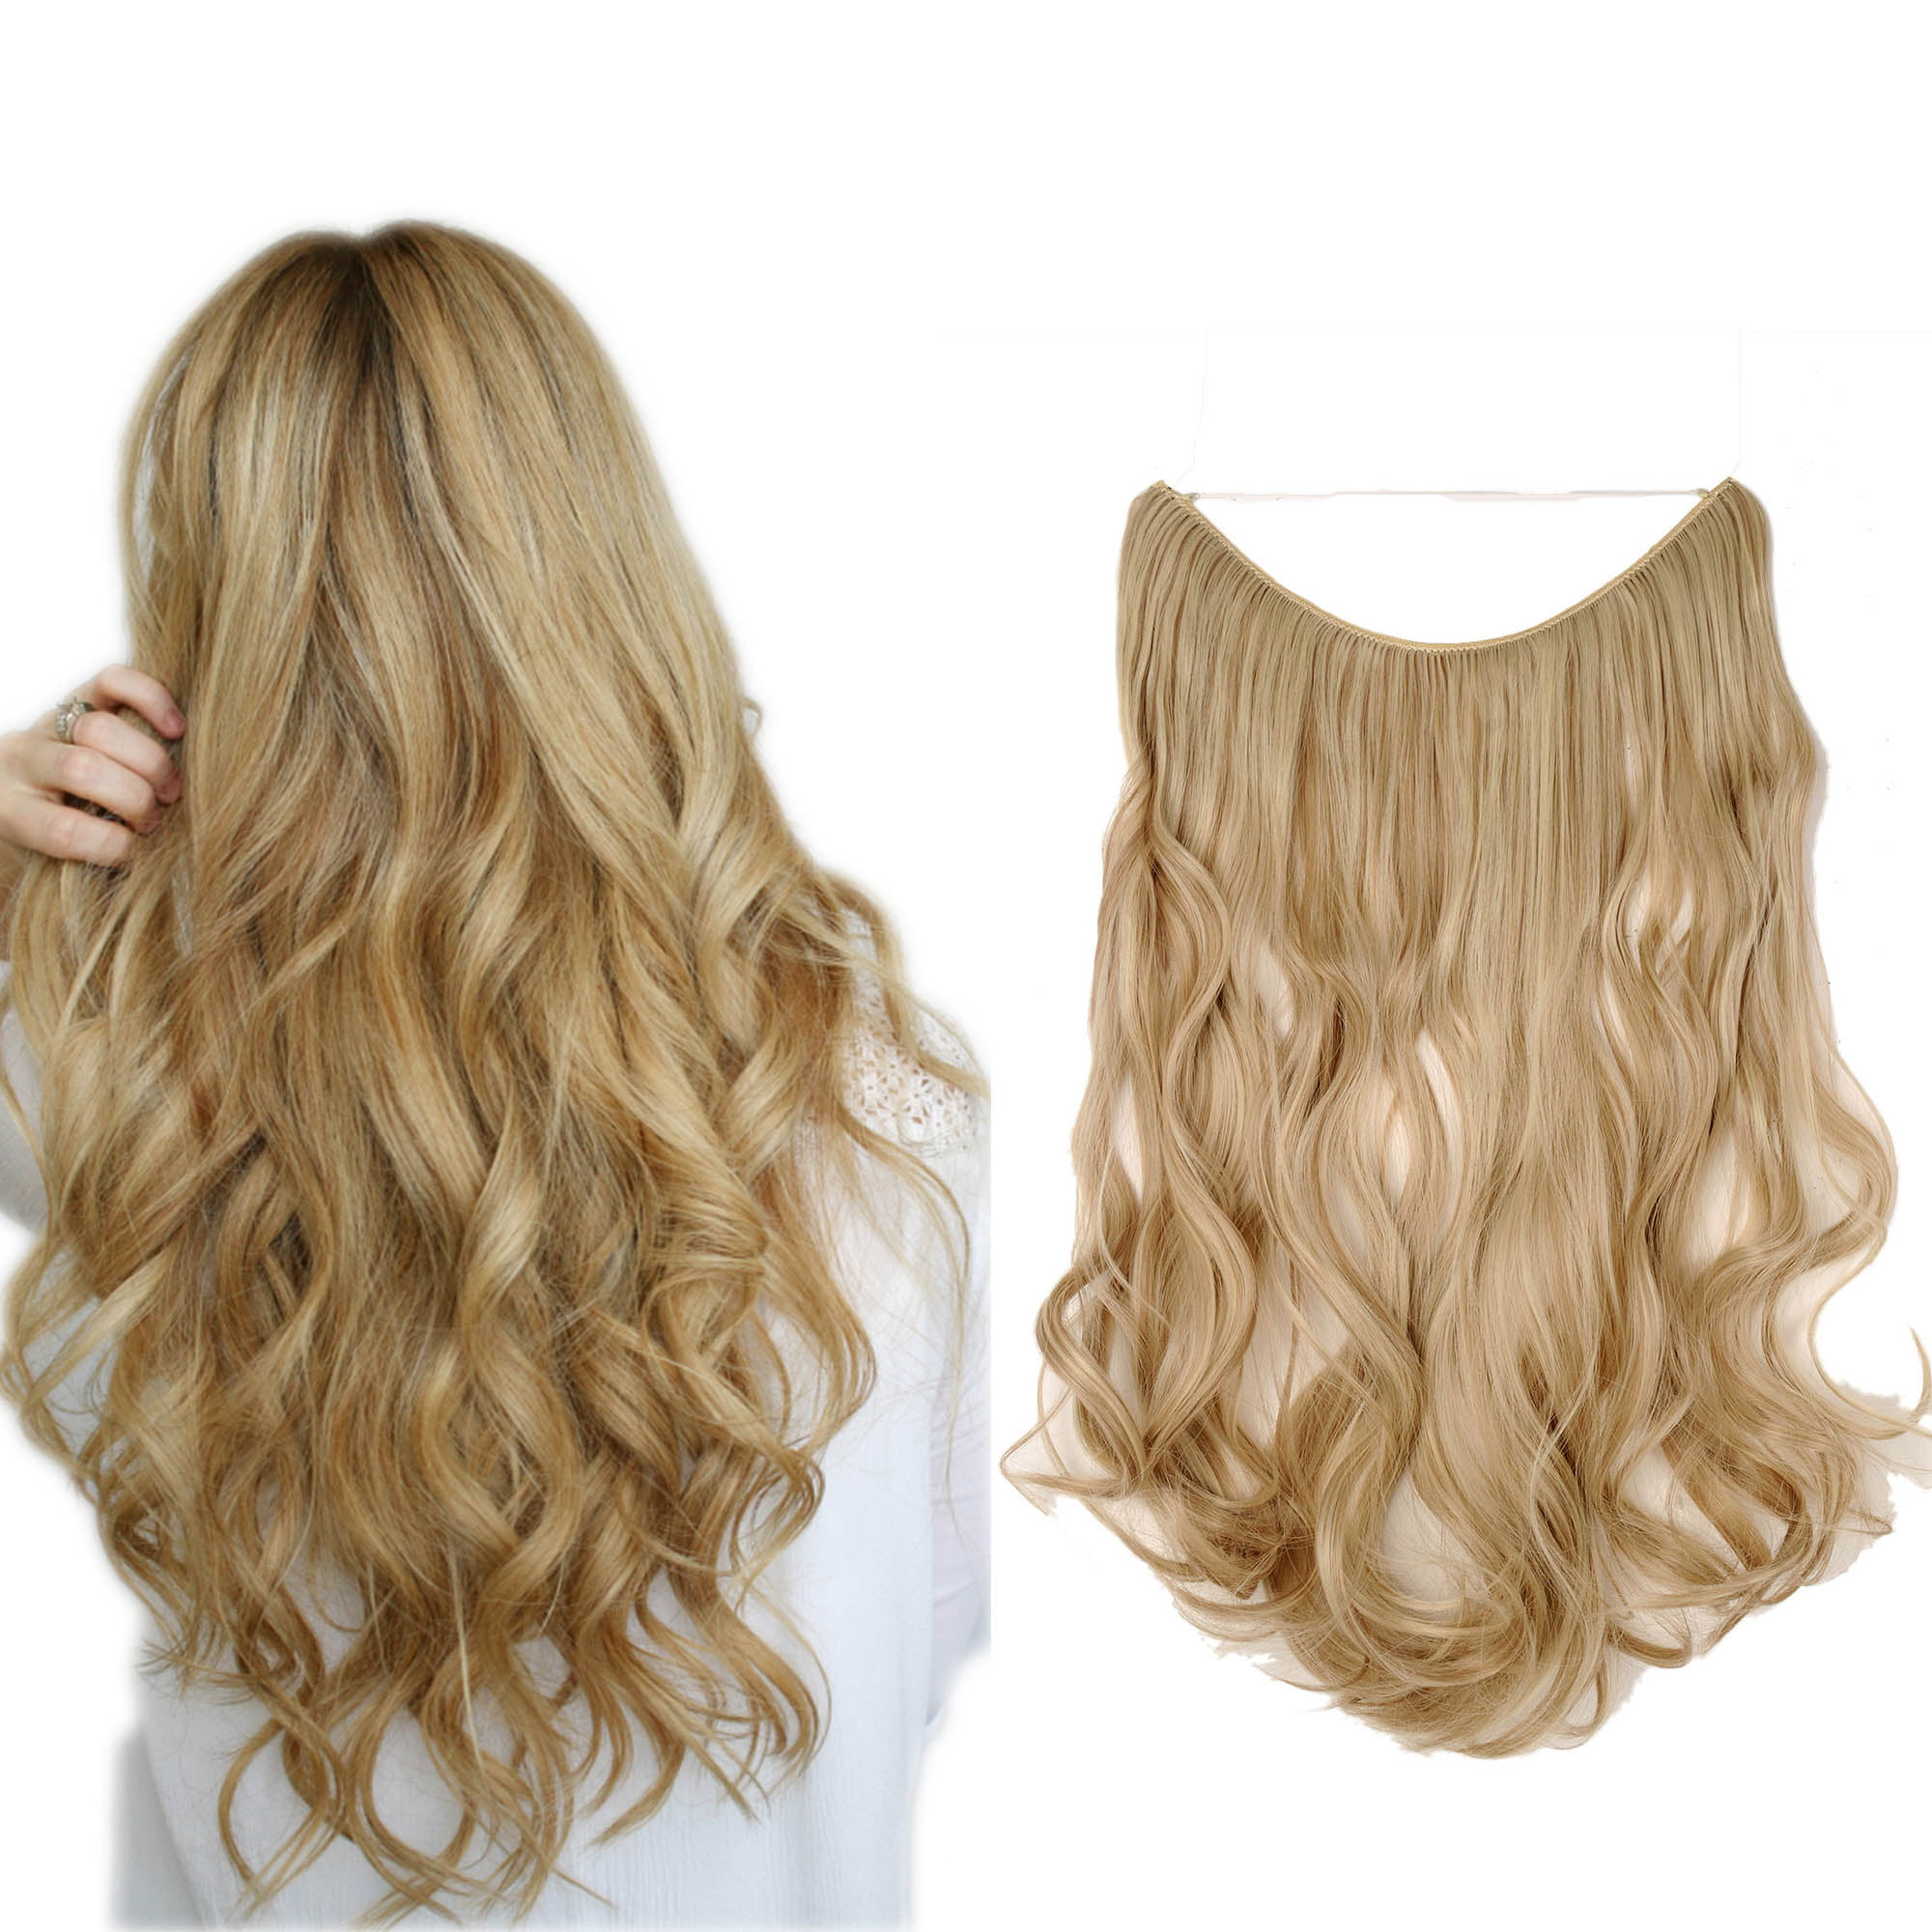 Fashion Source Hair Extensions Color Chart